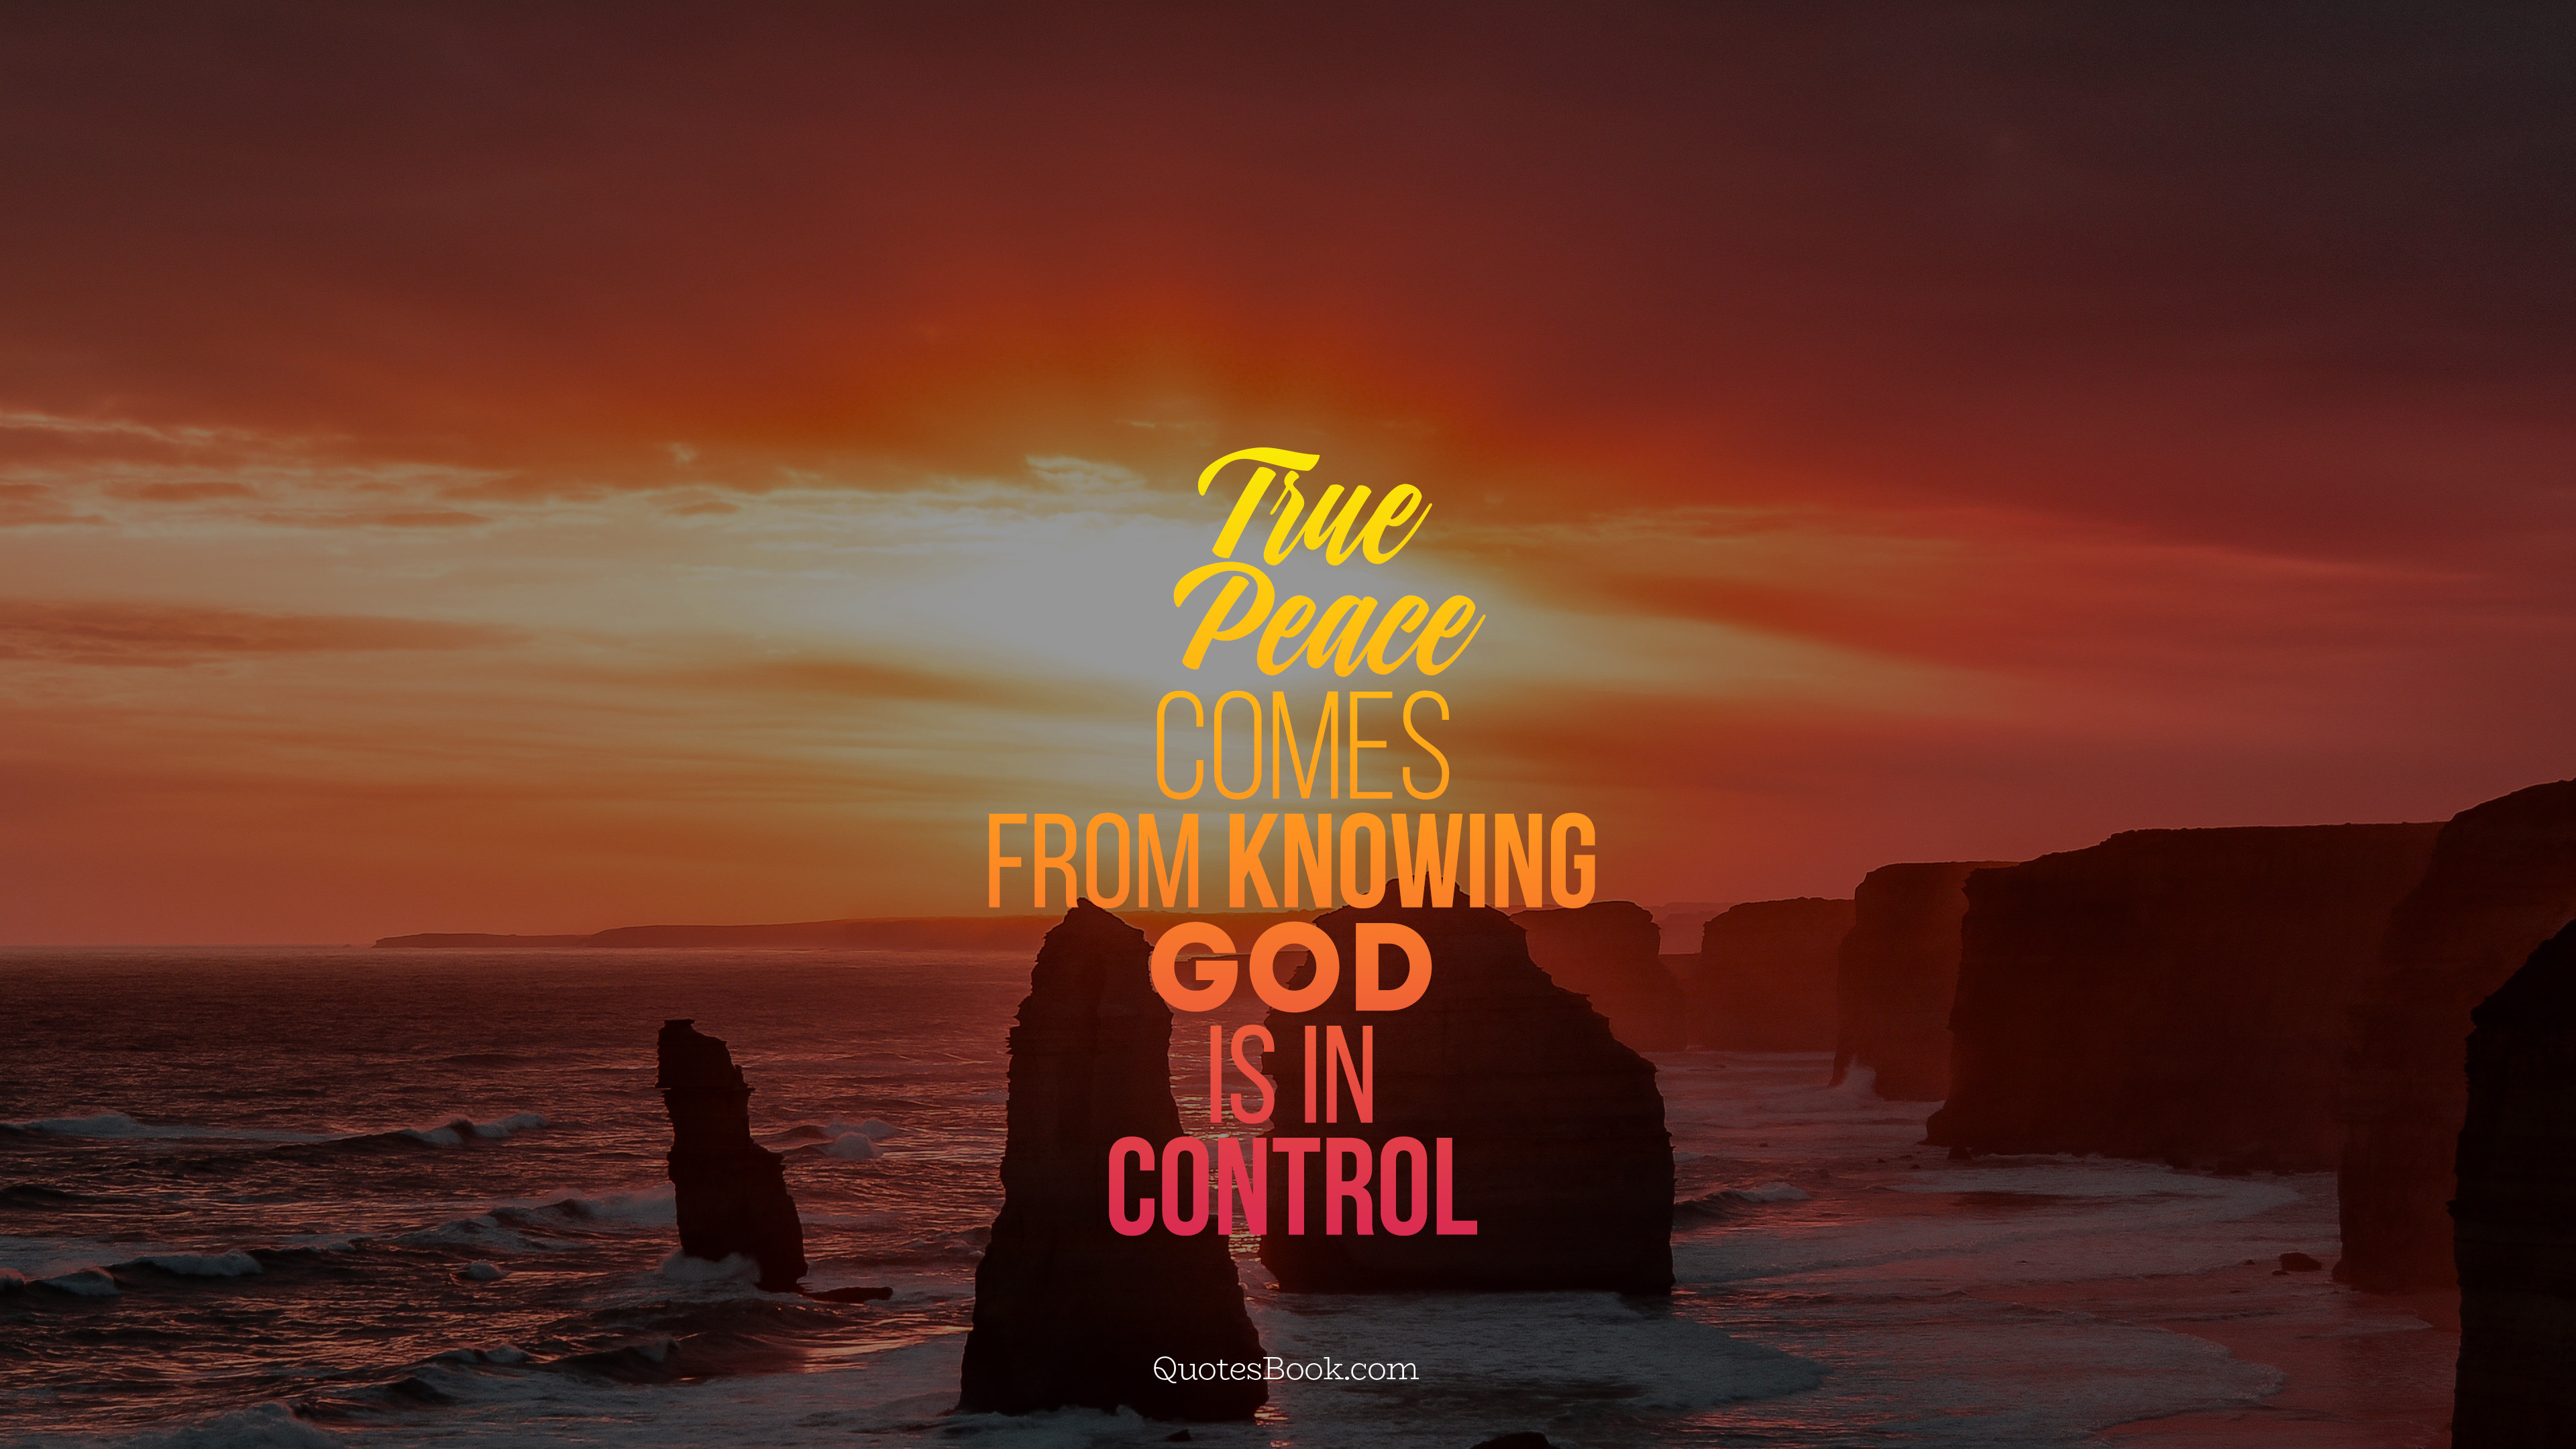 true peace comes from knowing god is in control 3840x2160 1707